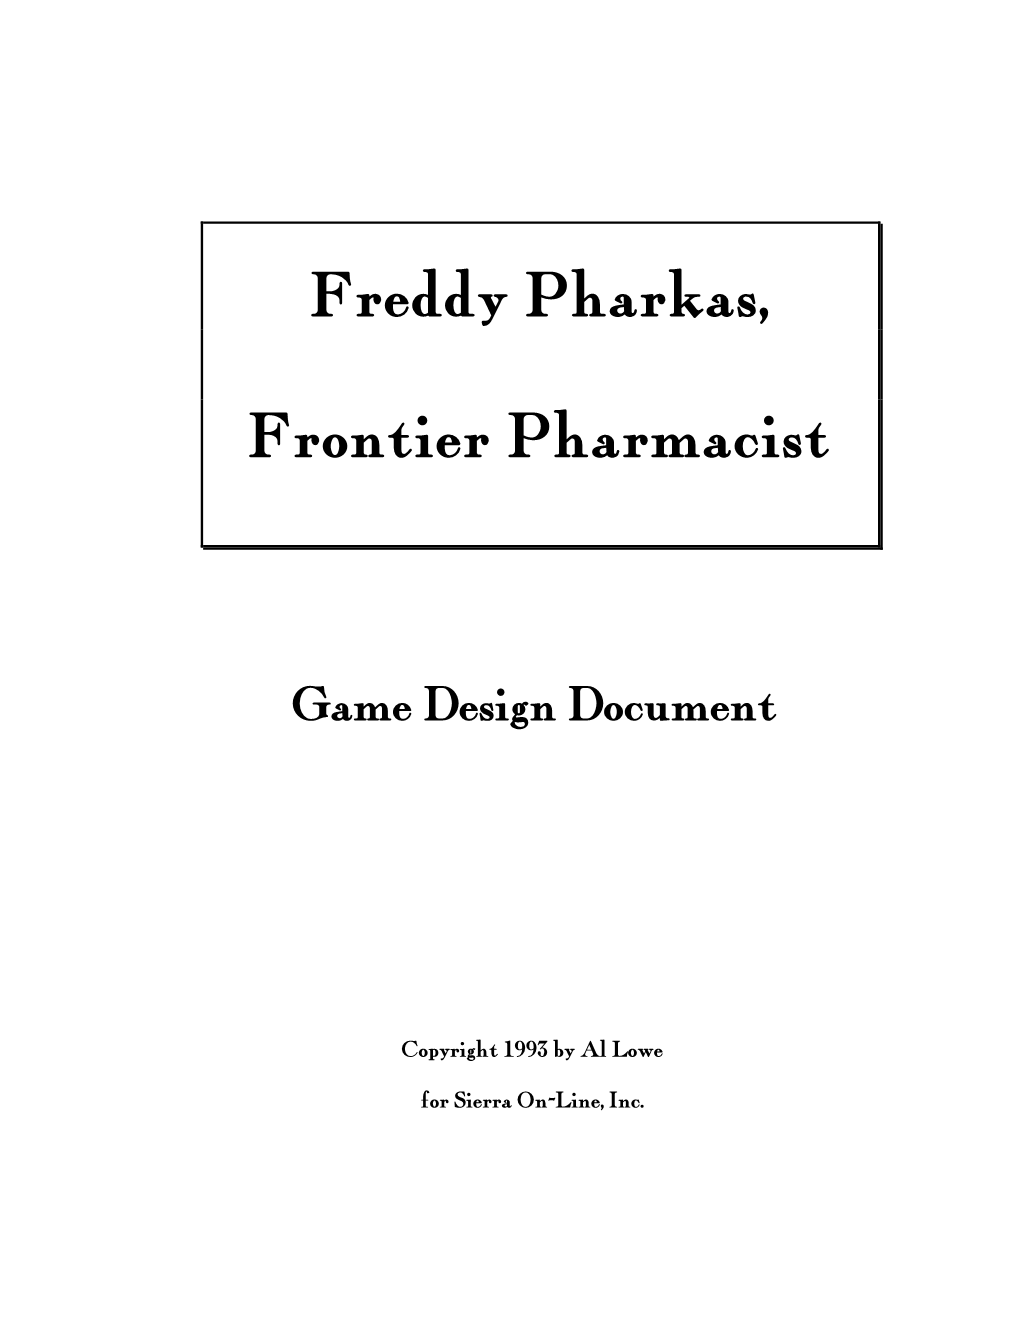 Freddy Pharkas, Frontier Pharmacist Design Document Page 2 Copyright 1992 by Al Lowe